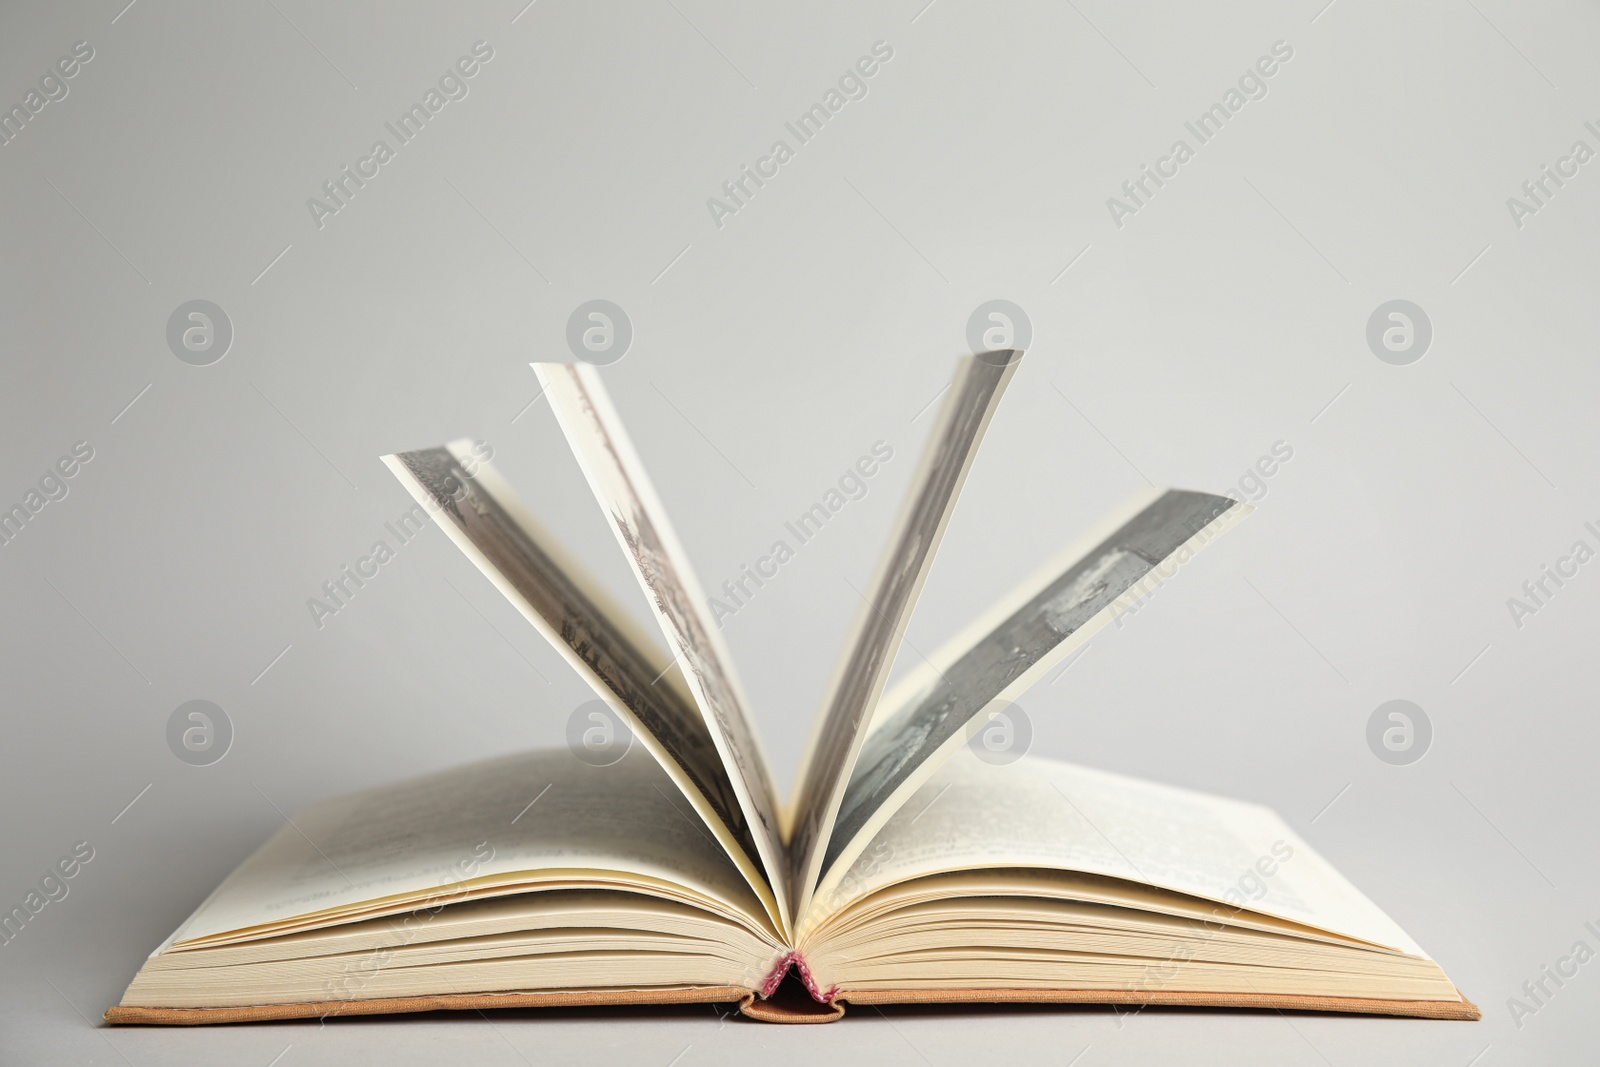 Photo of Open old hardcover book on light grey background